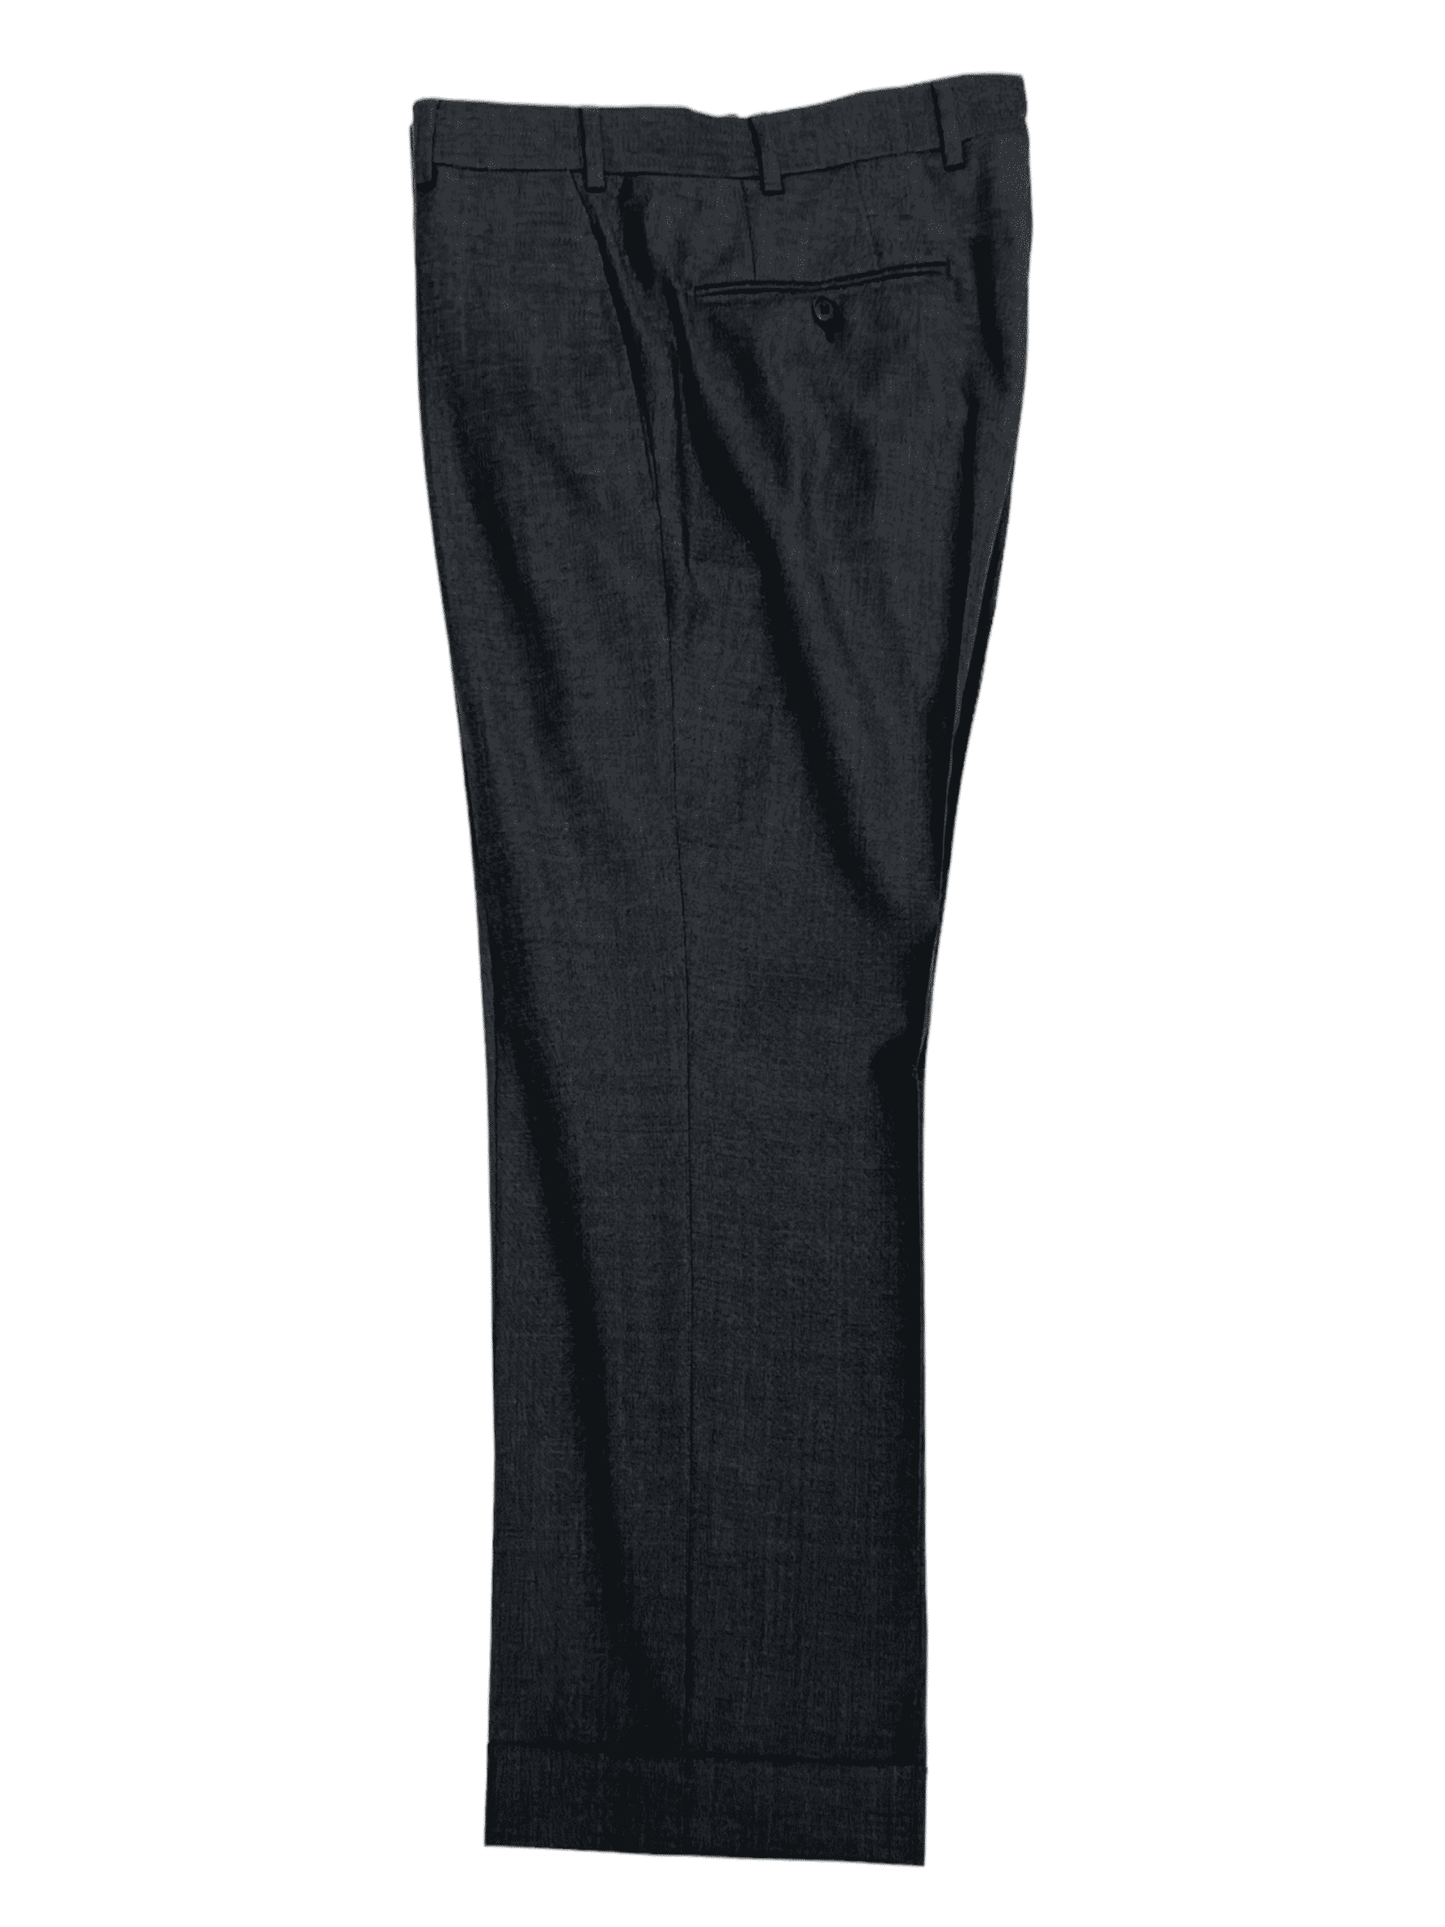 Tom Ford Charcoal Grey Wool Dress Pant 34W 27.5L - Genuine Design Luxury Consignment Calgary, Alberta, Canada New and Pre-Owned Clothing, Shoes, Accessories.